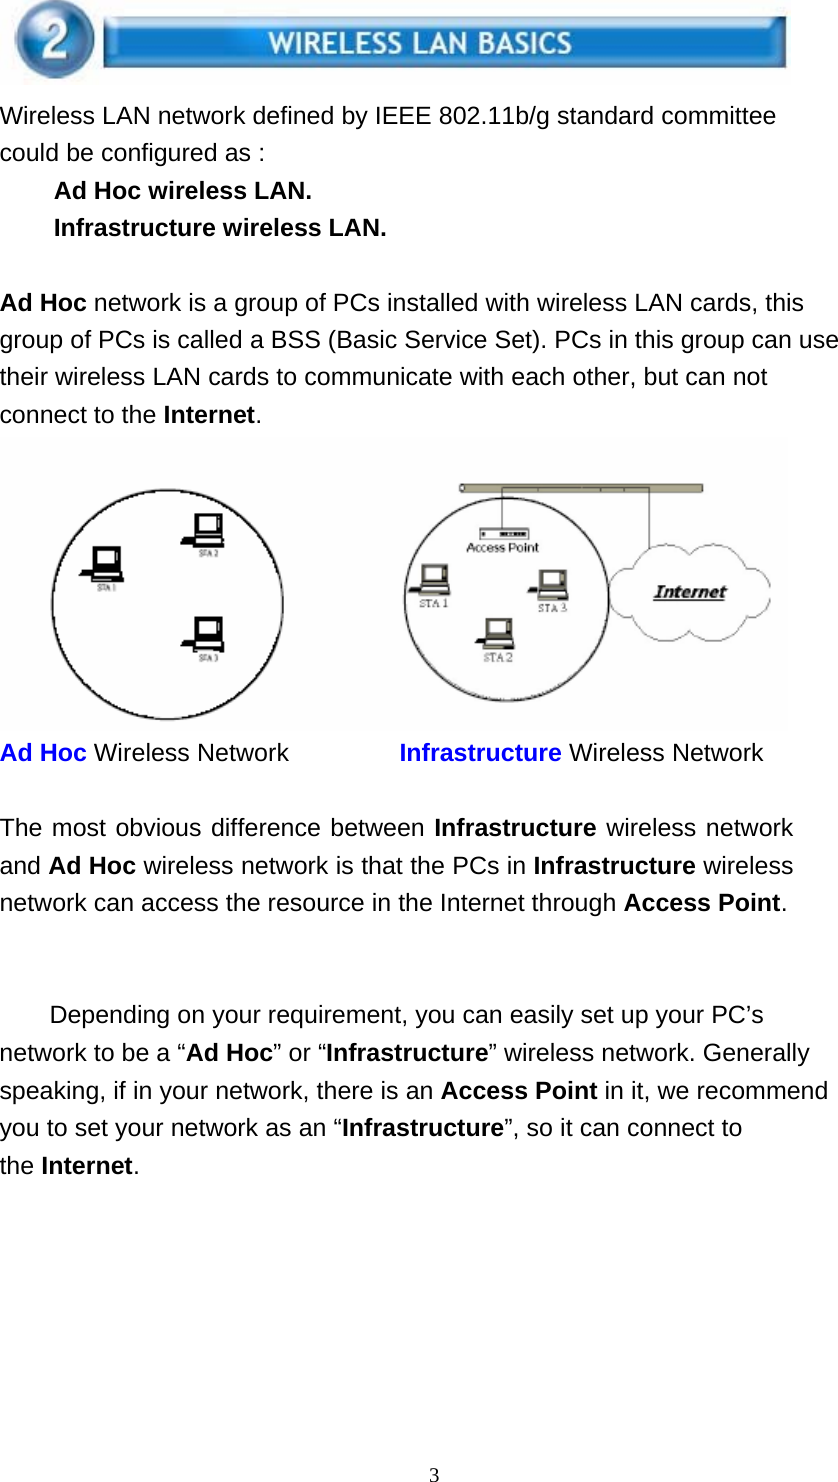    Wireless LAN network defined by IEEE 802.11b/g standard committee could be configured as : Ad Hoc wireless LAN. Infrastructure wireless LAN.   Ad Hoc network is a group of PCs installed with wireless LAN cards, this group of PCs is called a BSS (Basic Service Set). PCs in this group can use their wireless LAN cards to communicate with each other, but can not connect to the Internet.  Ad Hoc Wireless Network  Infrastructure Wireless Network   The most obvious difference between Infrastructure wireless network and Ad Hoc wireless network is that the PCs in Infrastructure wireless network can access the resource in the Internet through Access Point.     Depending on your requirement, you can easily set up your PC’s network to be a “Ad Hoc” or “Infrastructure” wireless network. Generally speaking, if in your network, there is an Access Point in it, we recommend you to set your network as an “Infrastructure”, so it can connect to the Internet. 3  